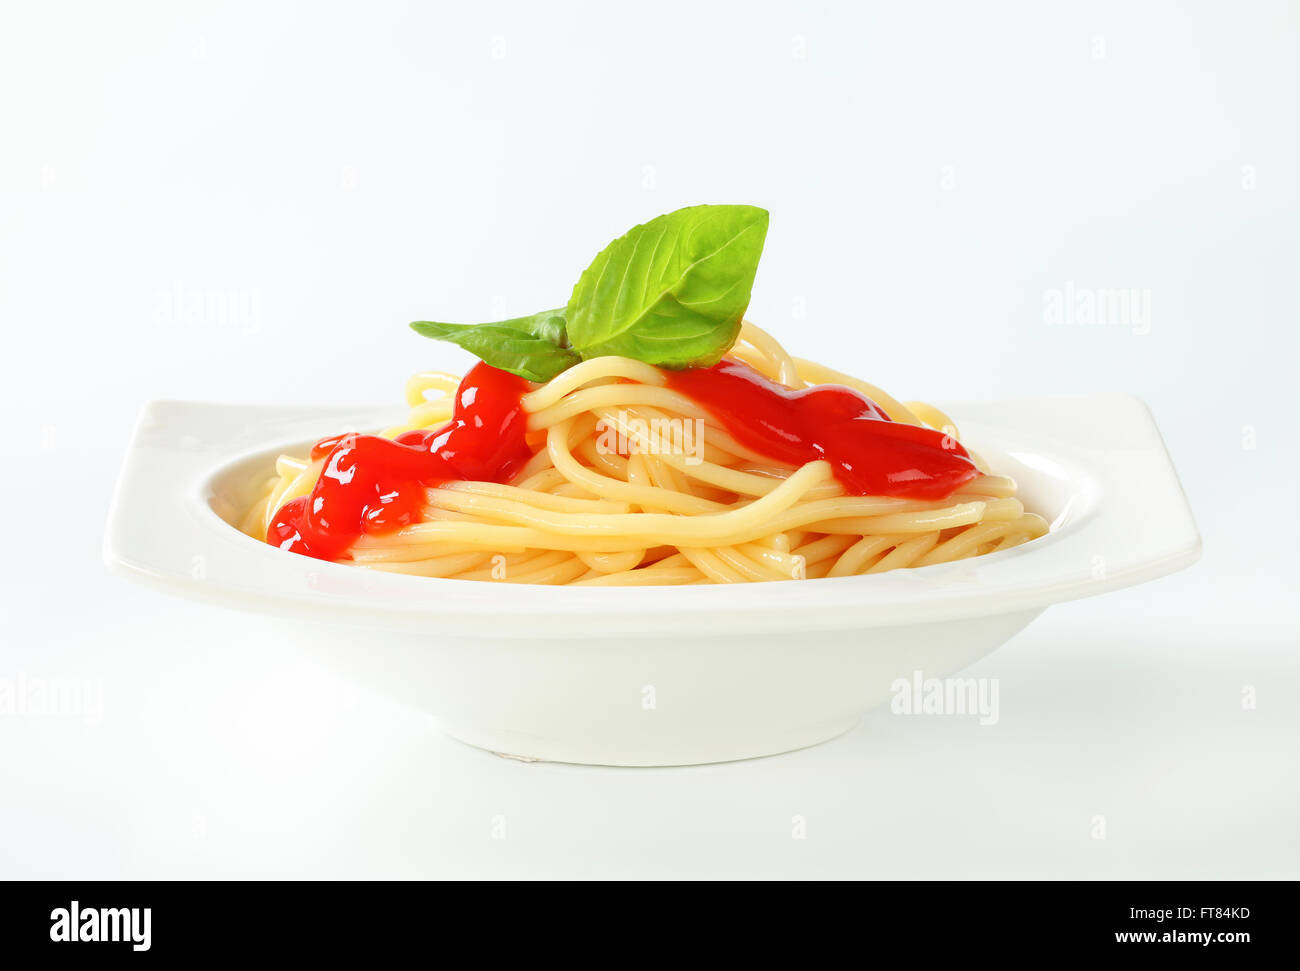 Portion of cooked spaghetti with ketchup Stock Photo